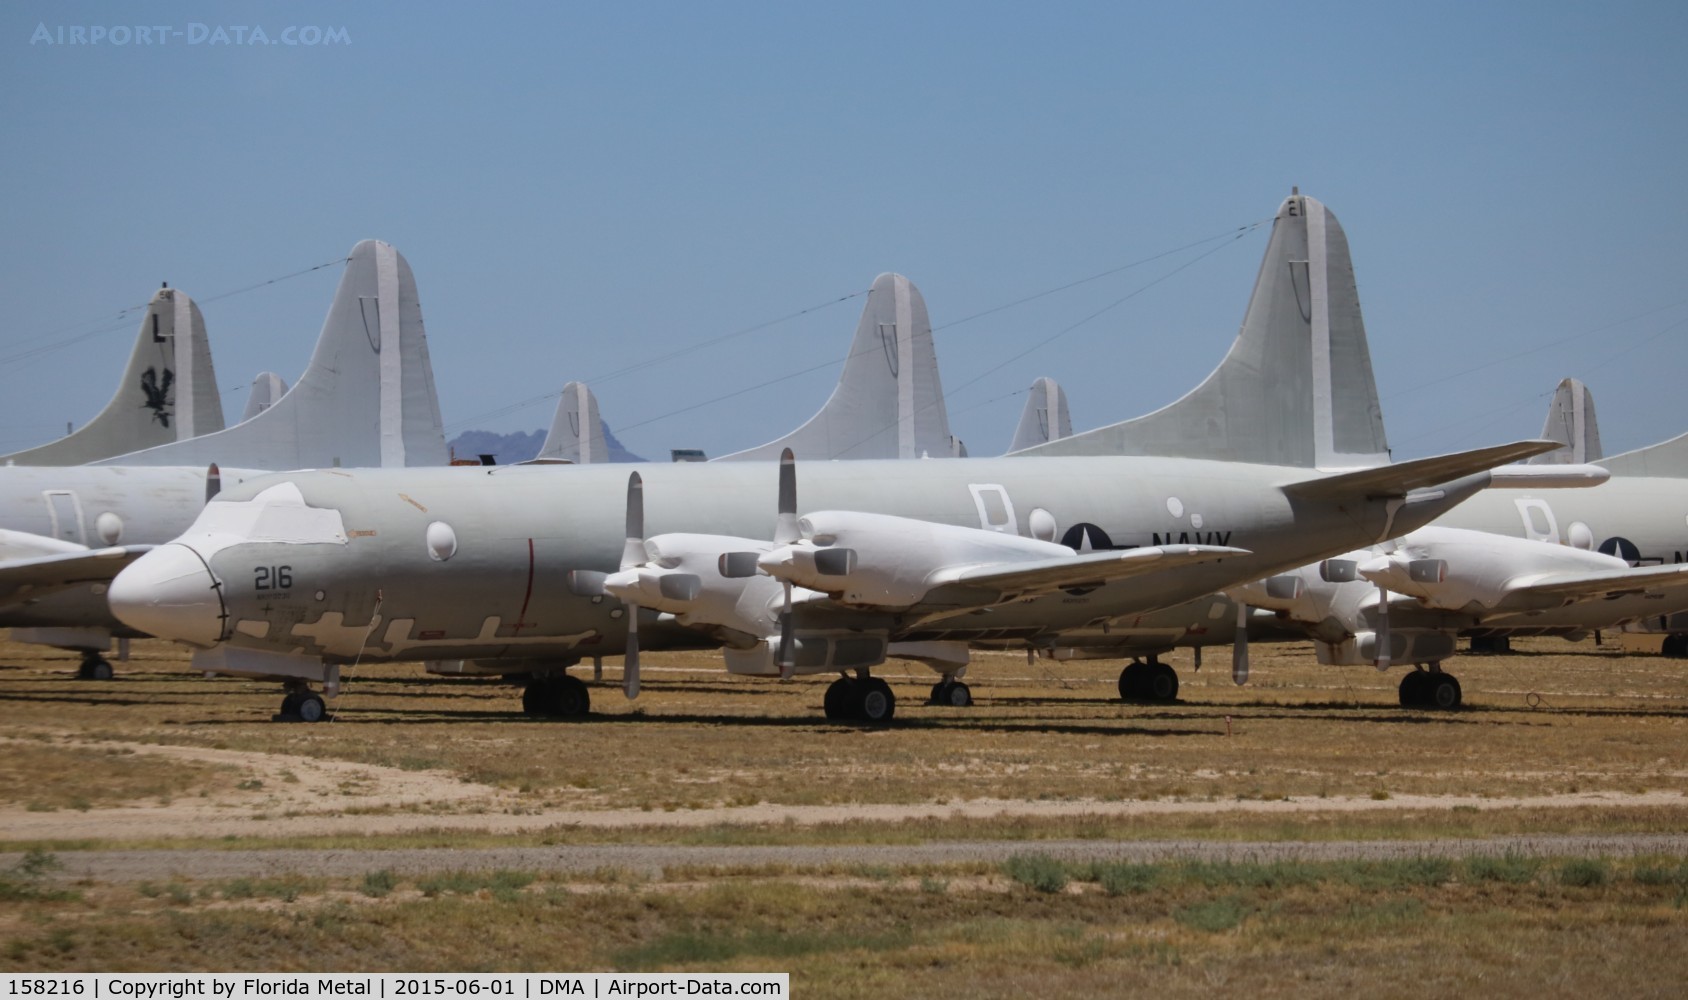 158216, Lockheed P-3C Orion C/N 285A-5561, P-3C Orion